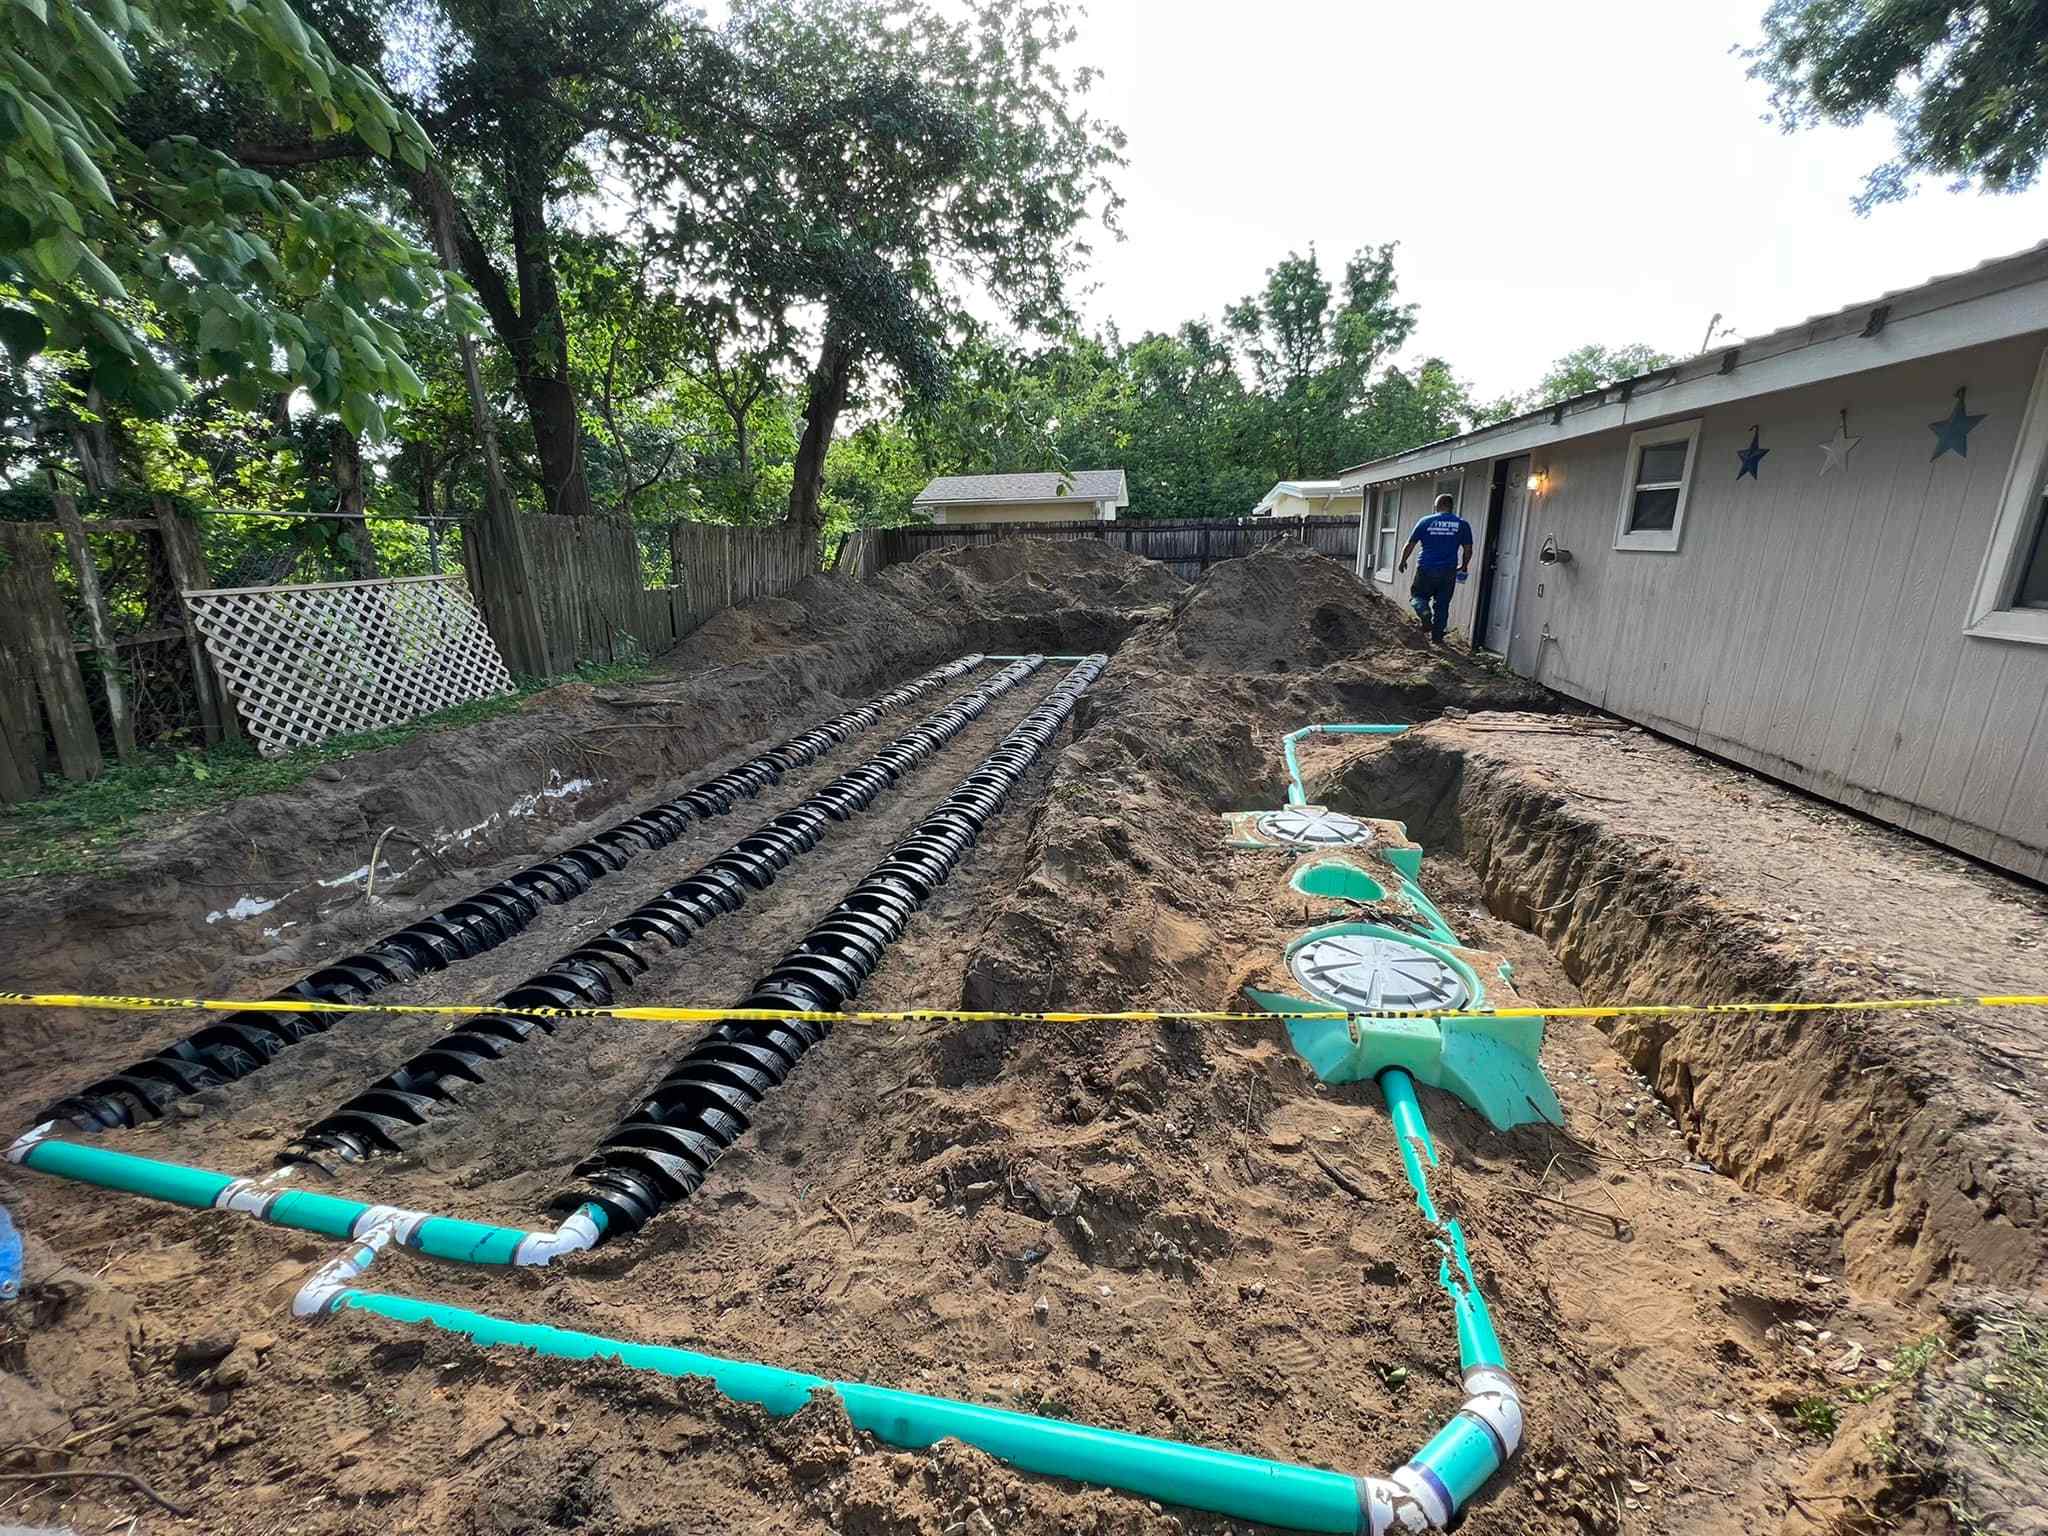 Victor, a plumbing expert, is installing a water line in a backyard.